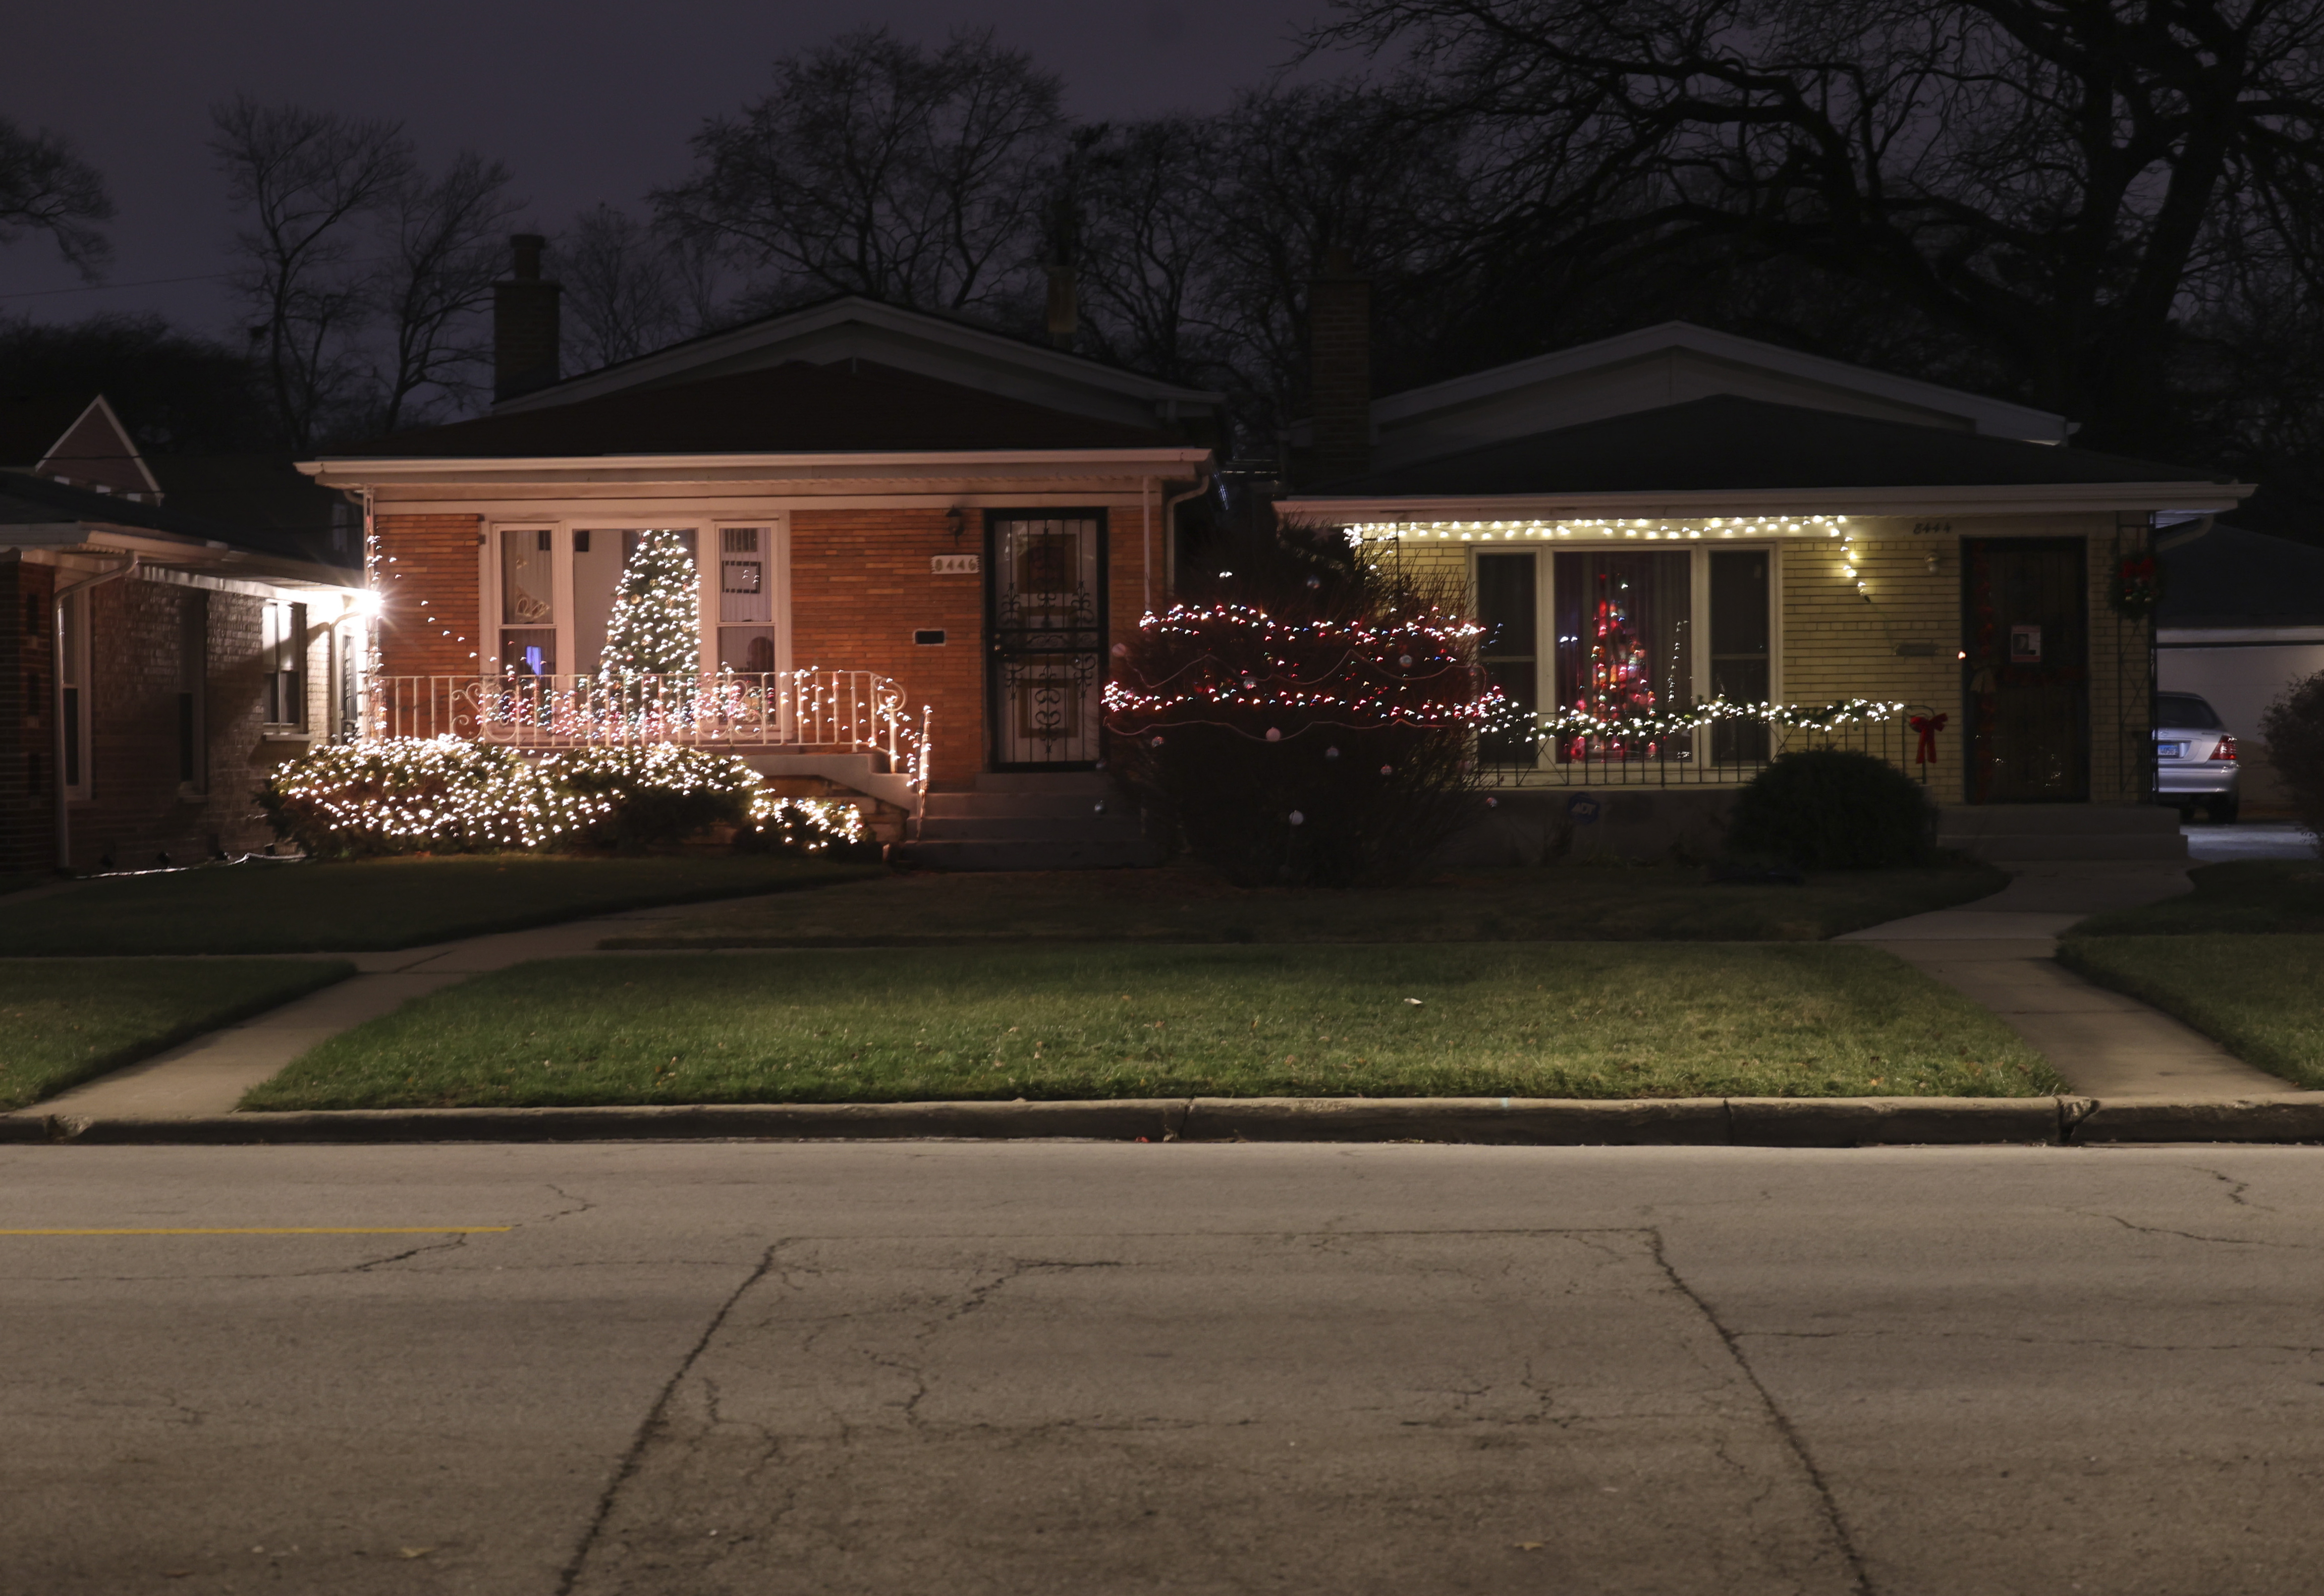 On Chicago's South Side, volunteers decorate homes for the holidays, aim to  help others, build community - Chicago Sun-Times